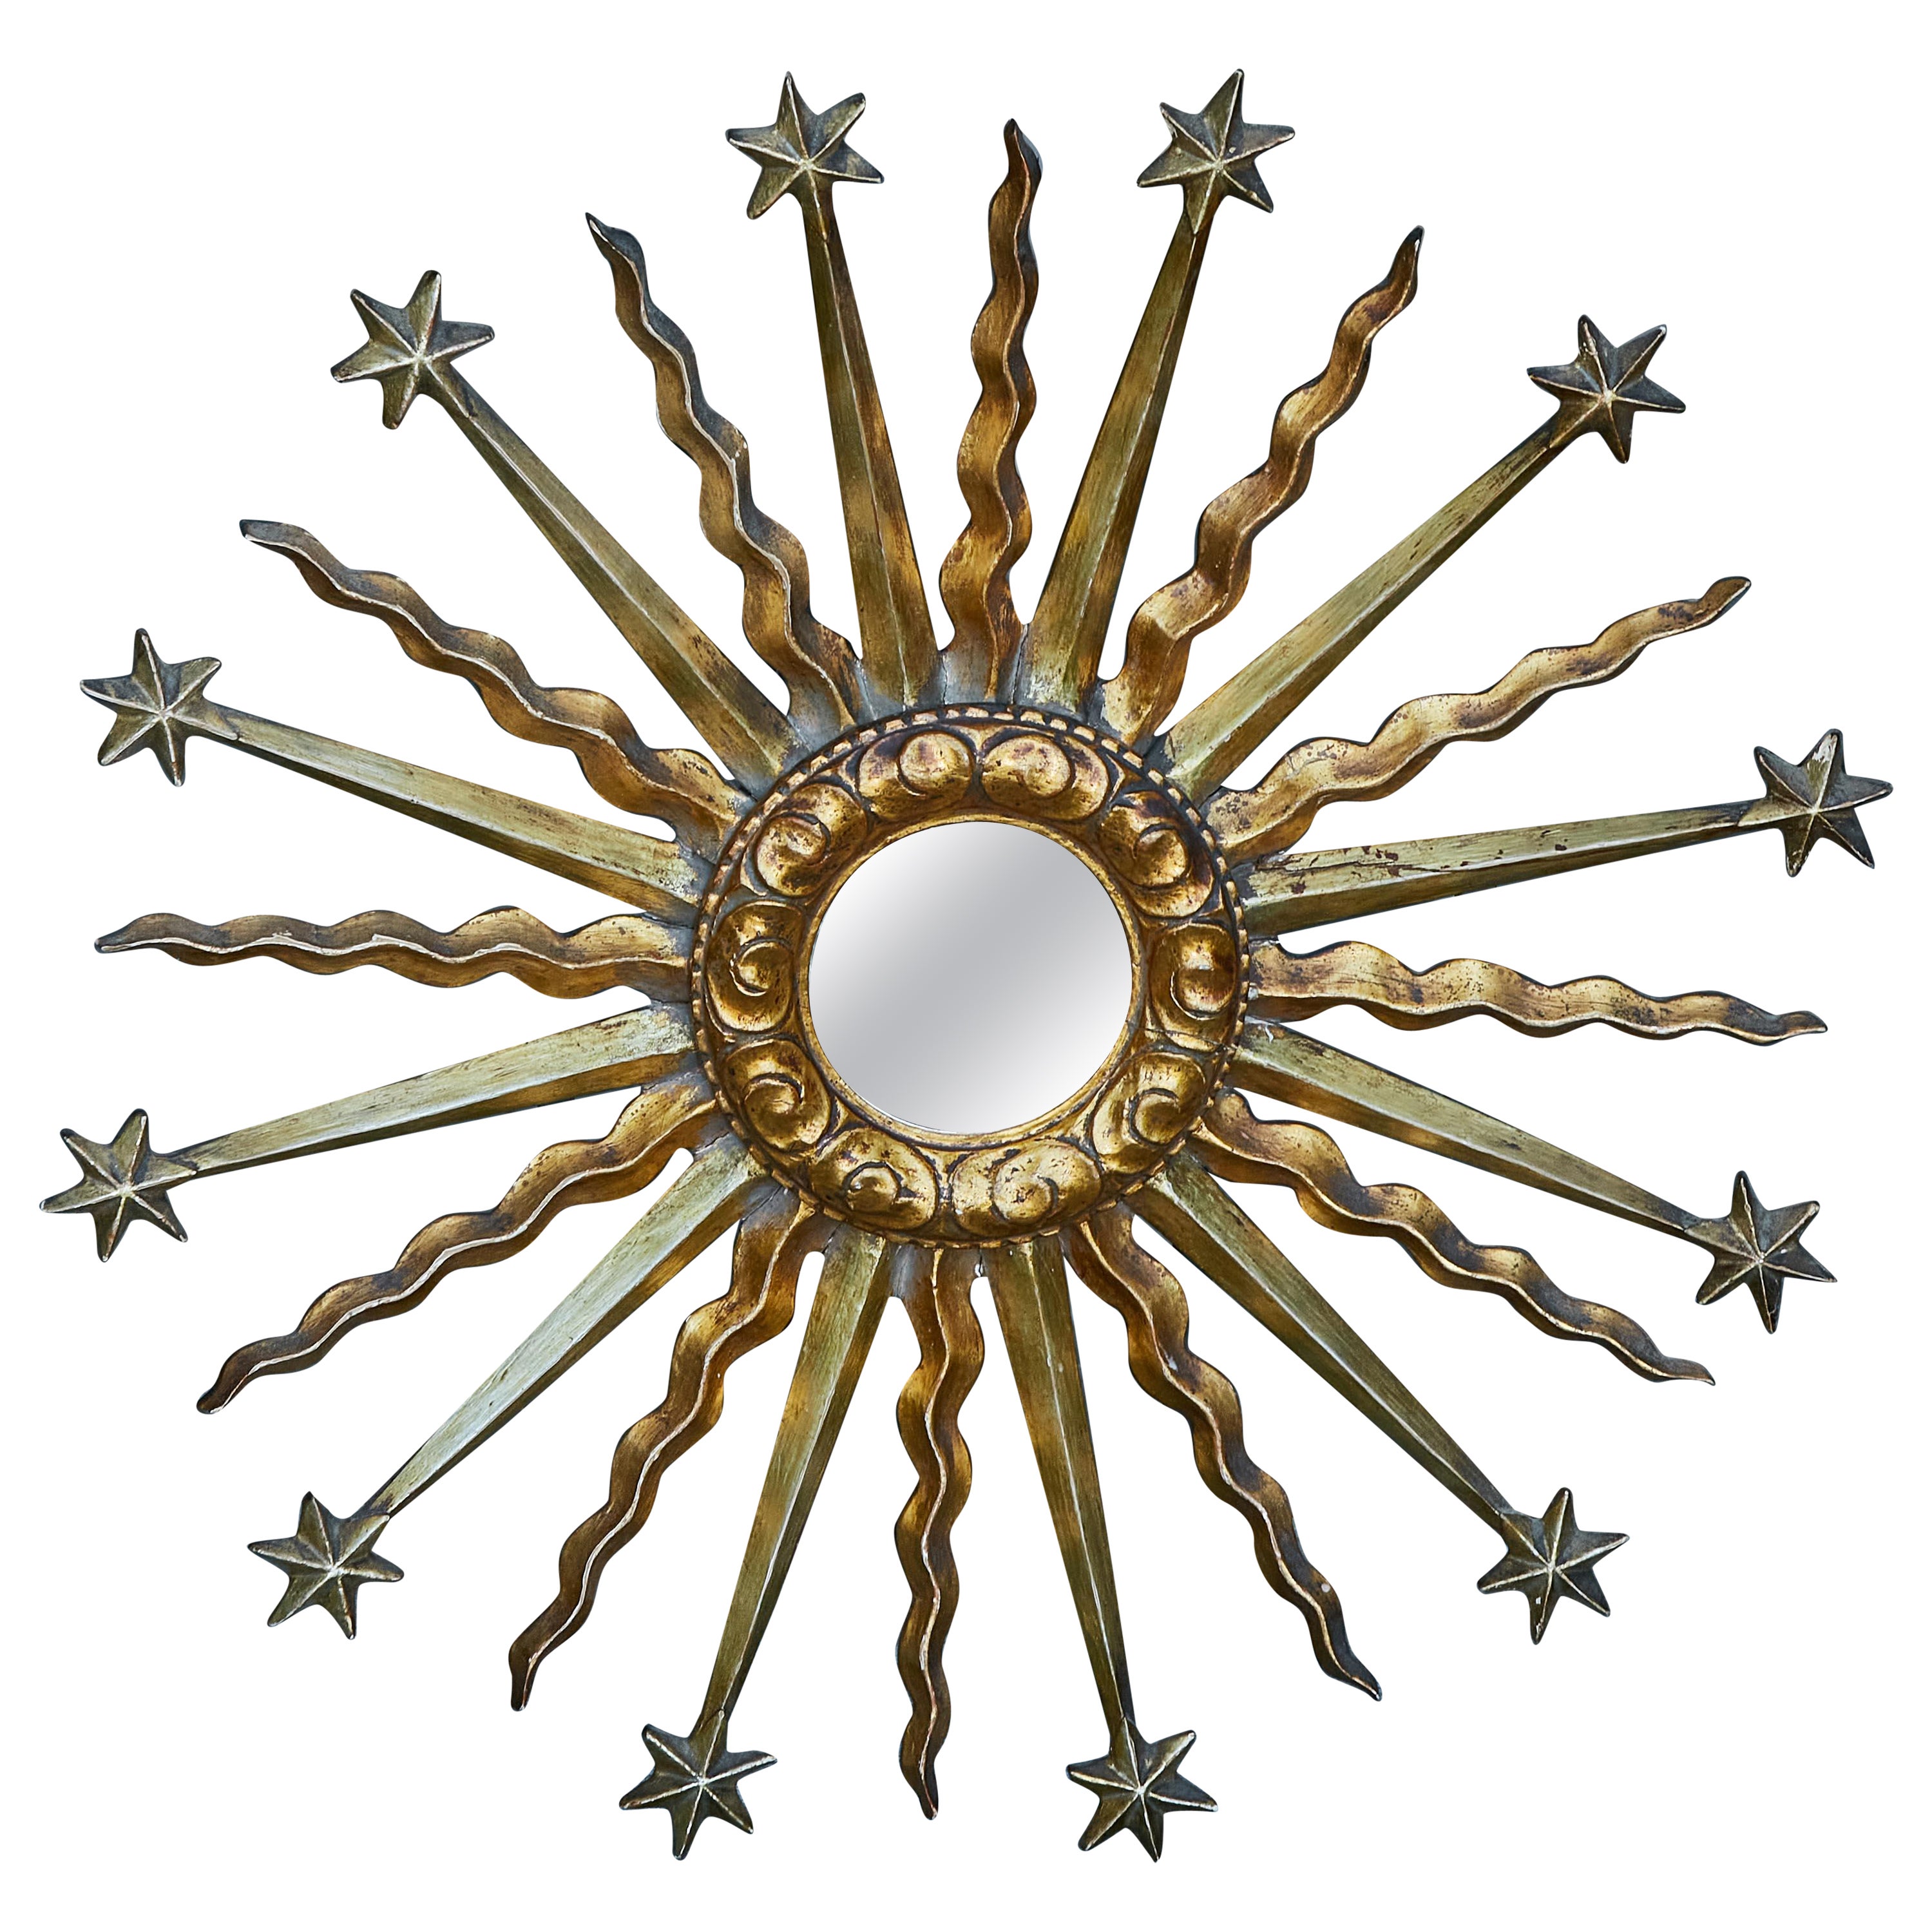 Midcentury French Giltwood Sunburst Mirror with Star and Cloud Motifs For Sale